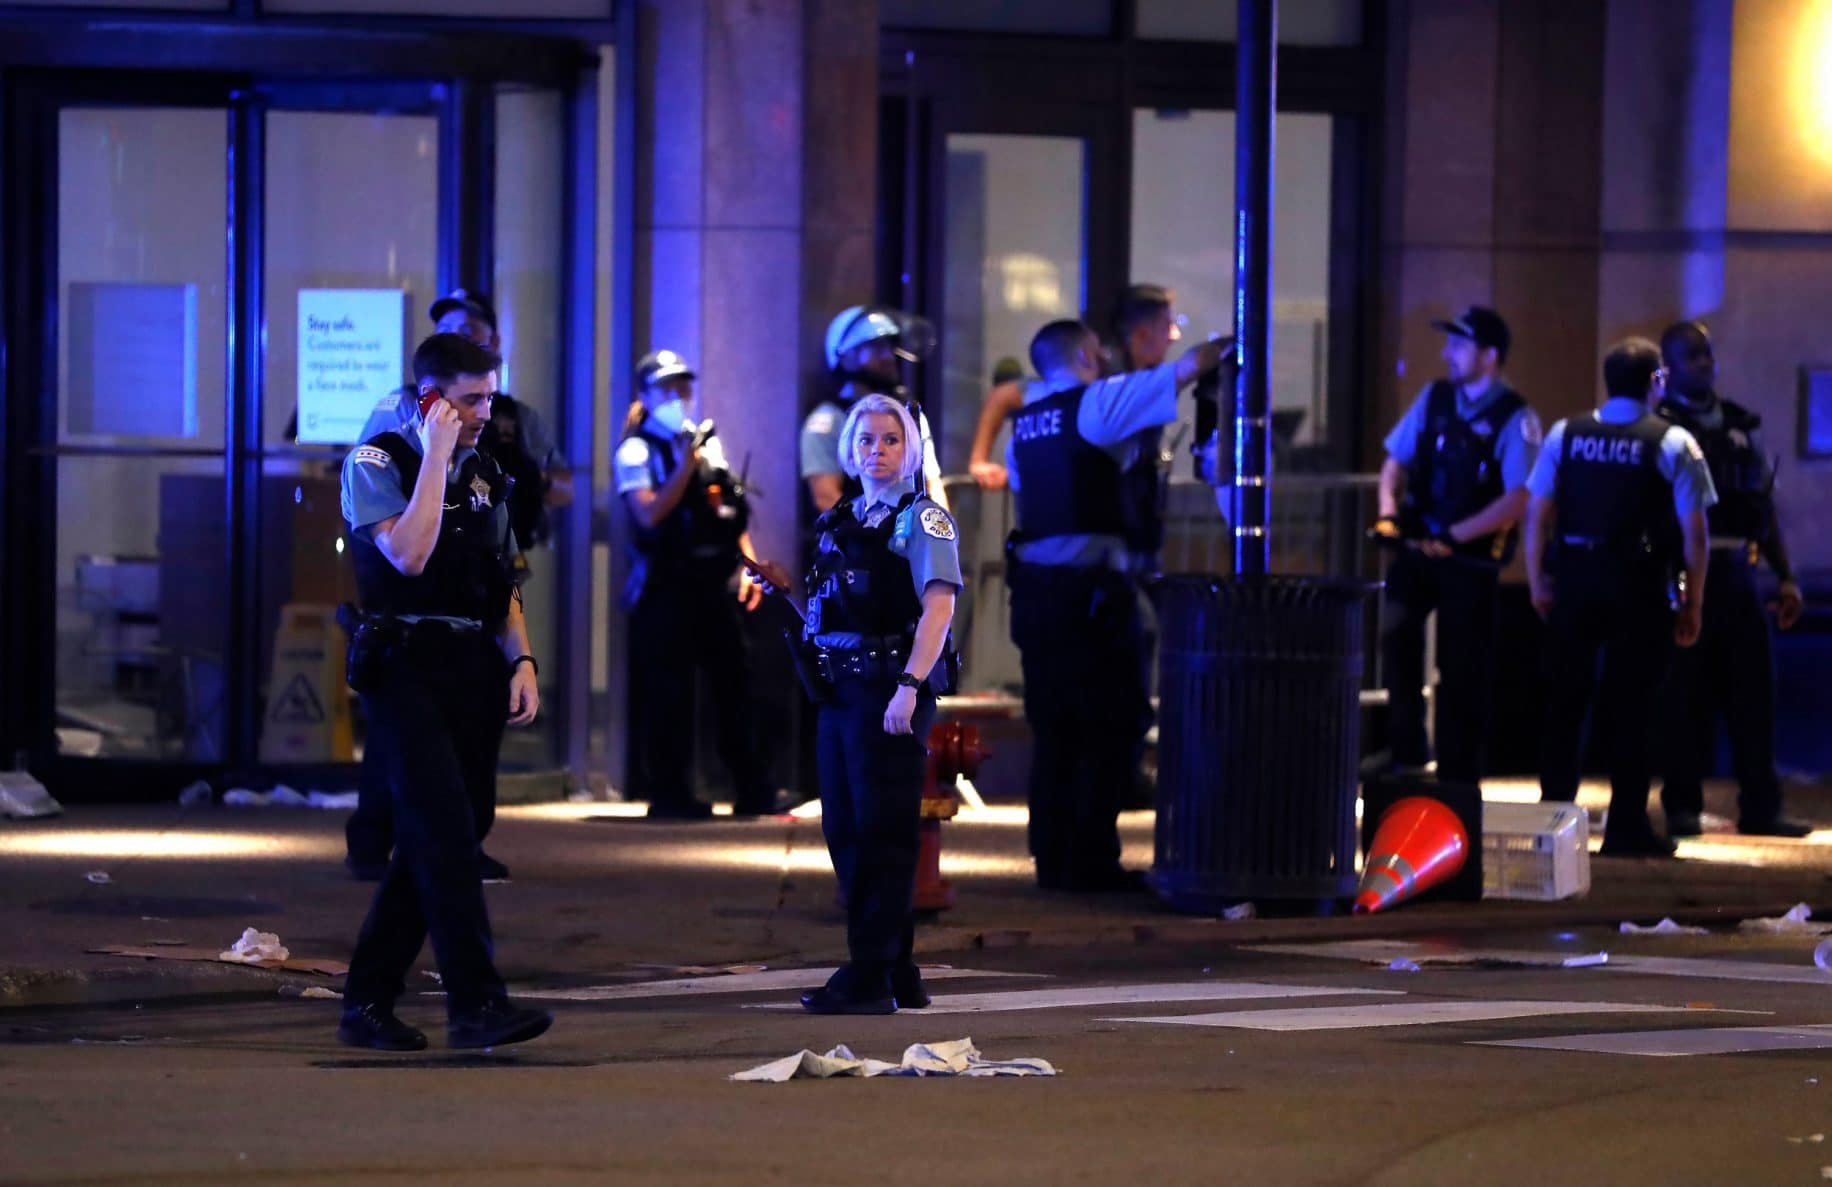 Videos 100+ arrested, 13 cops injured in Chicago riots and looting